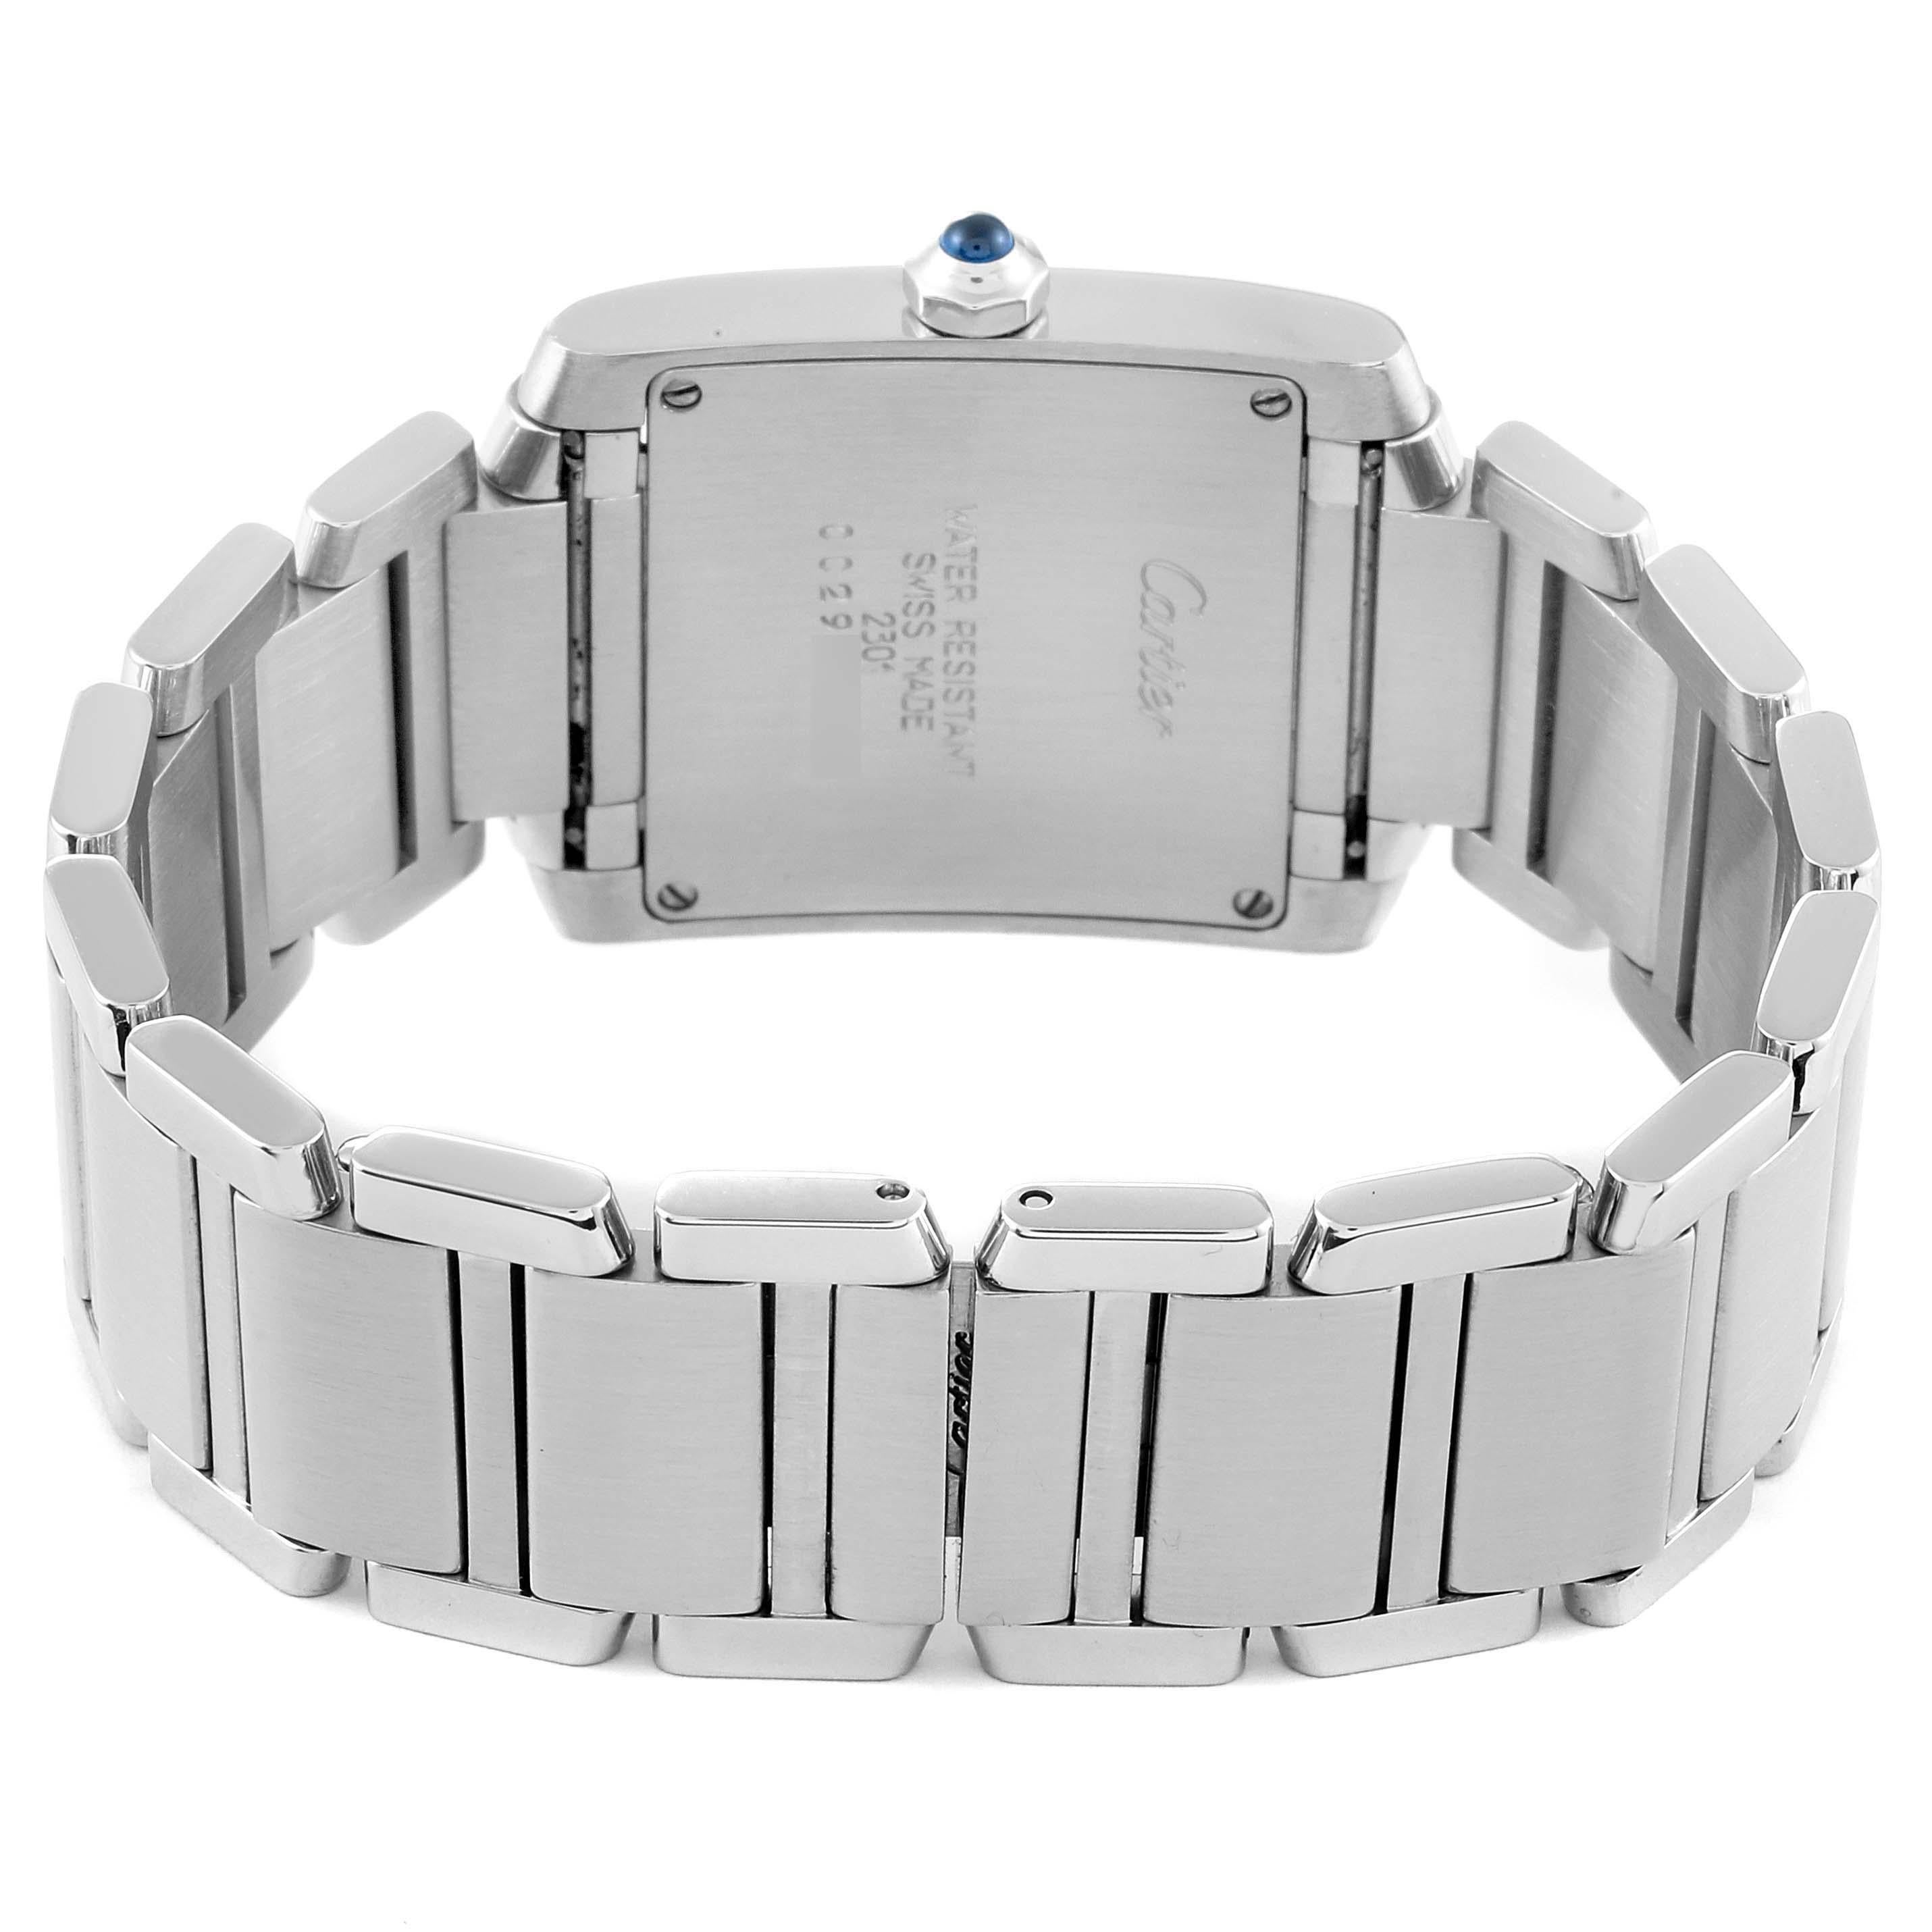 Cartier Tank Francaise Midsize Steel Ladies Watch WSTA0005 Box Papers 3